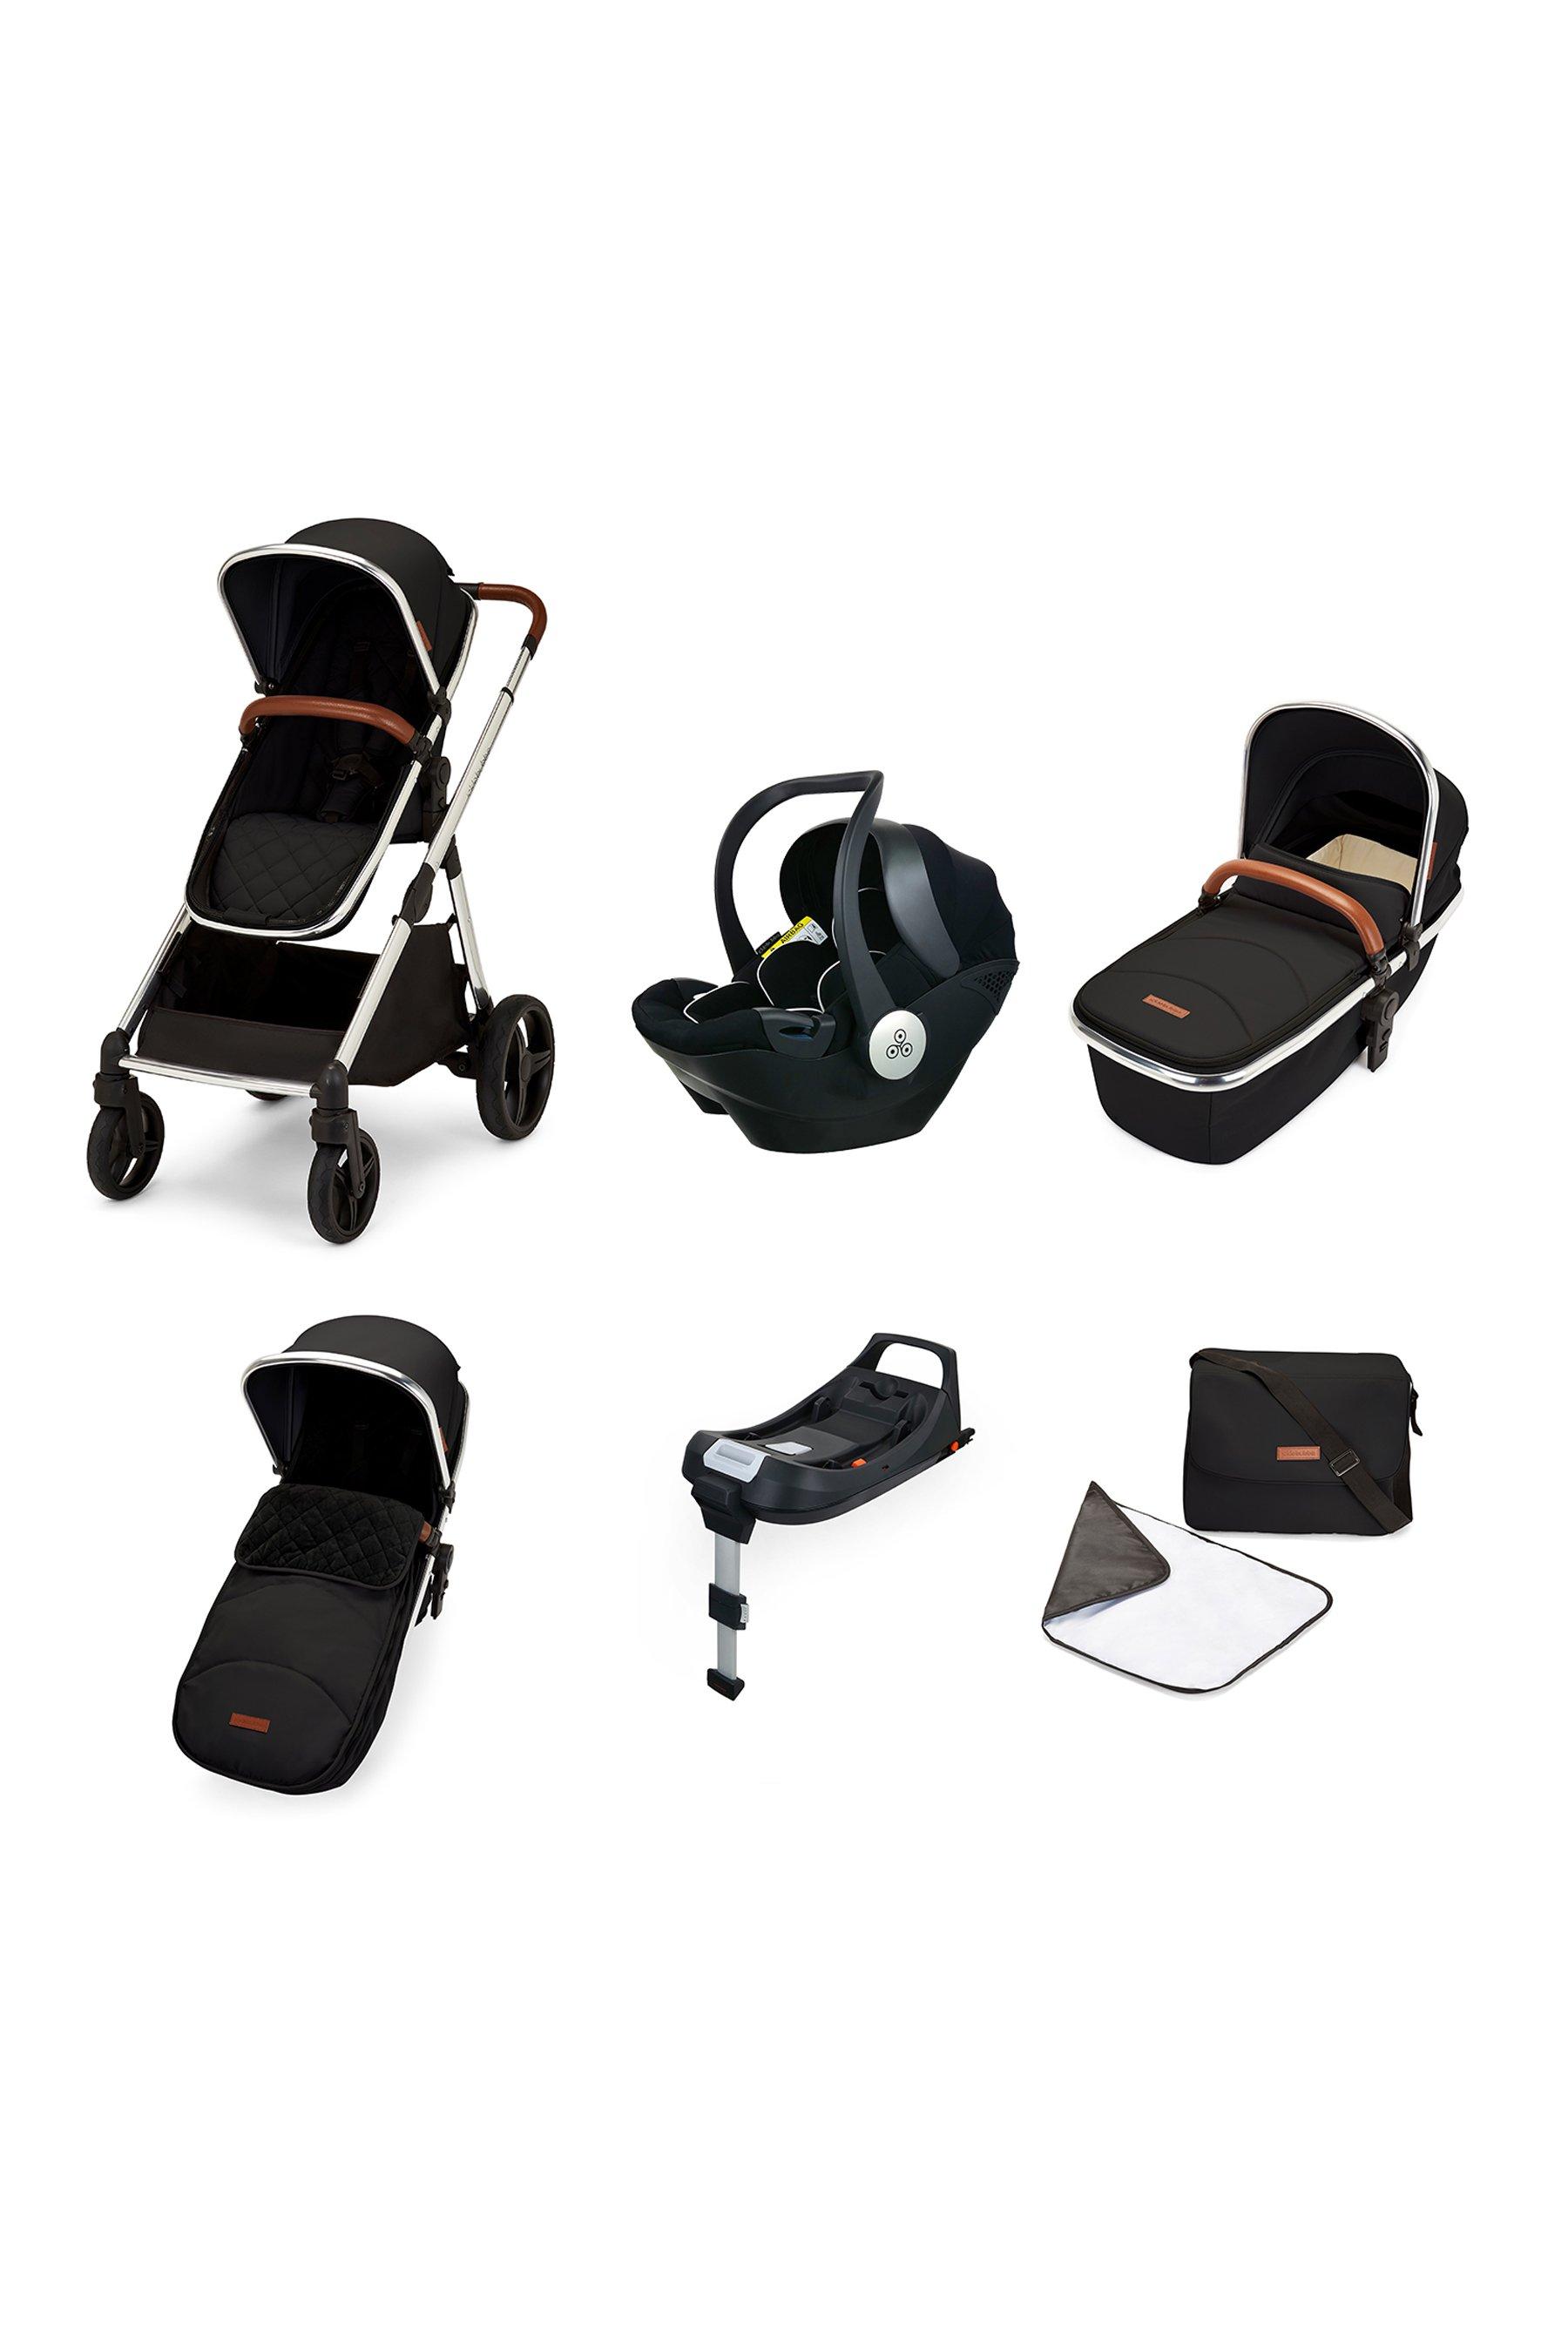 Ickle Bubba Eclipse I-Size Jet Black Travel System with Mercury C… – Natural